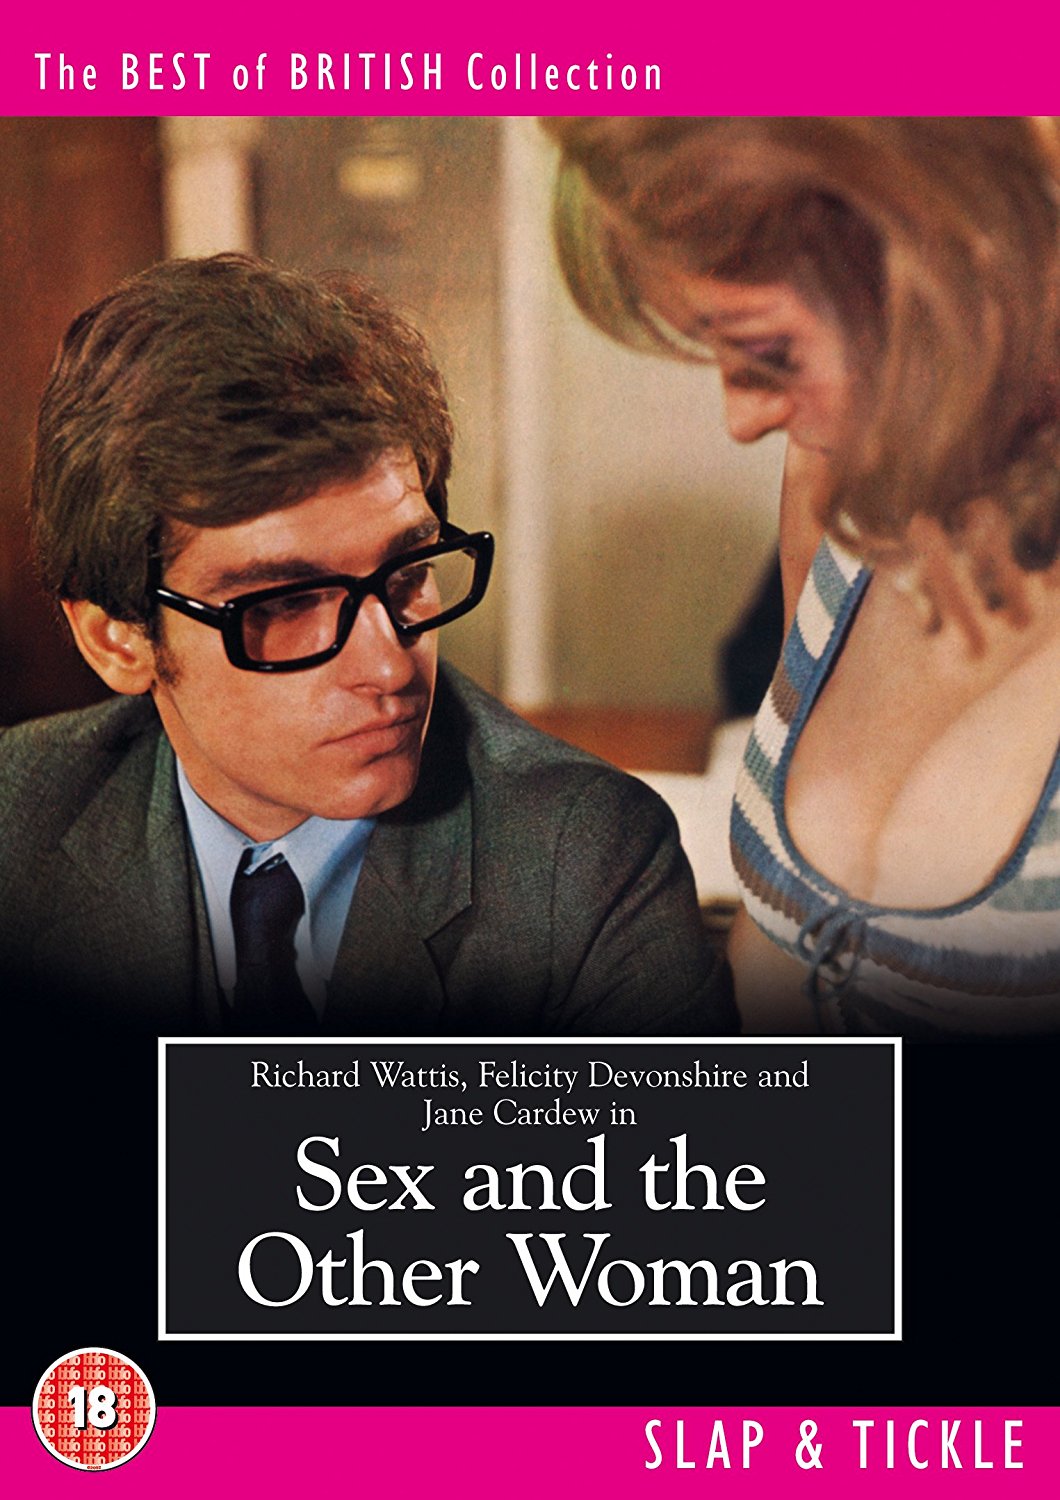 Sex and the Other Woman (1972) Screenshot 3